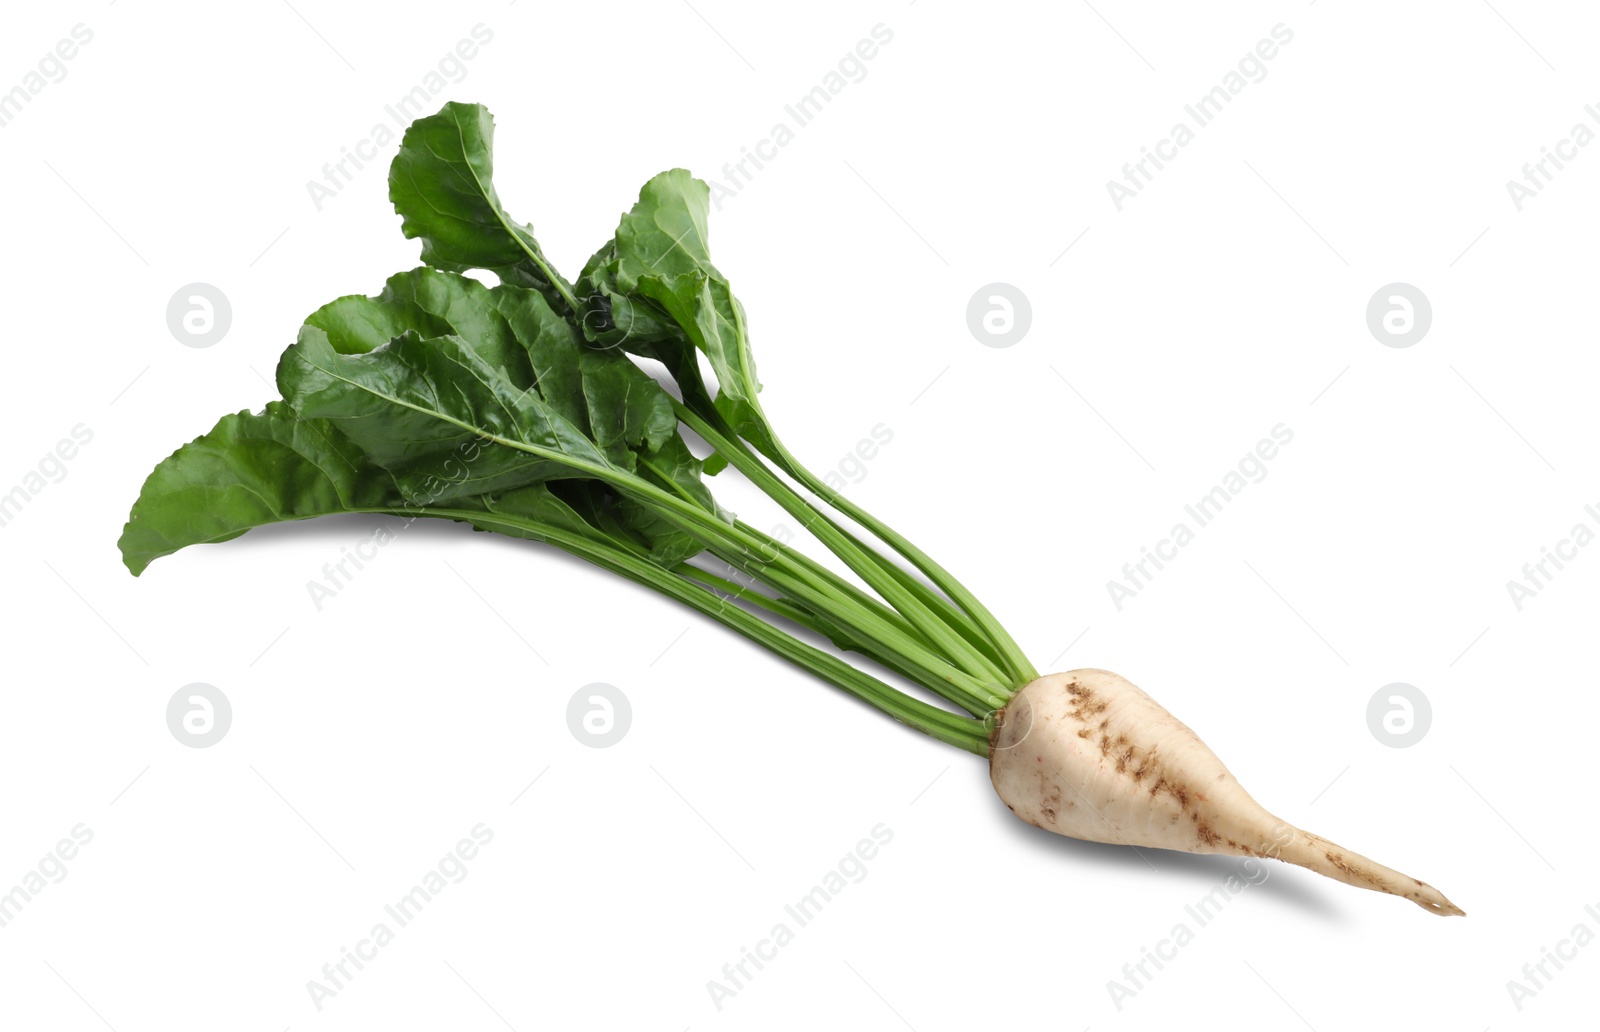 Photo of Sugar beet with leaves on white background